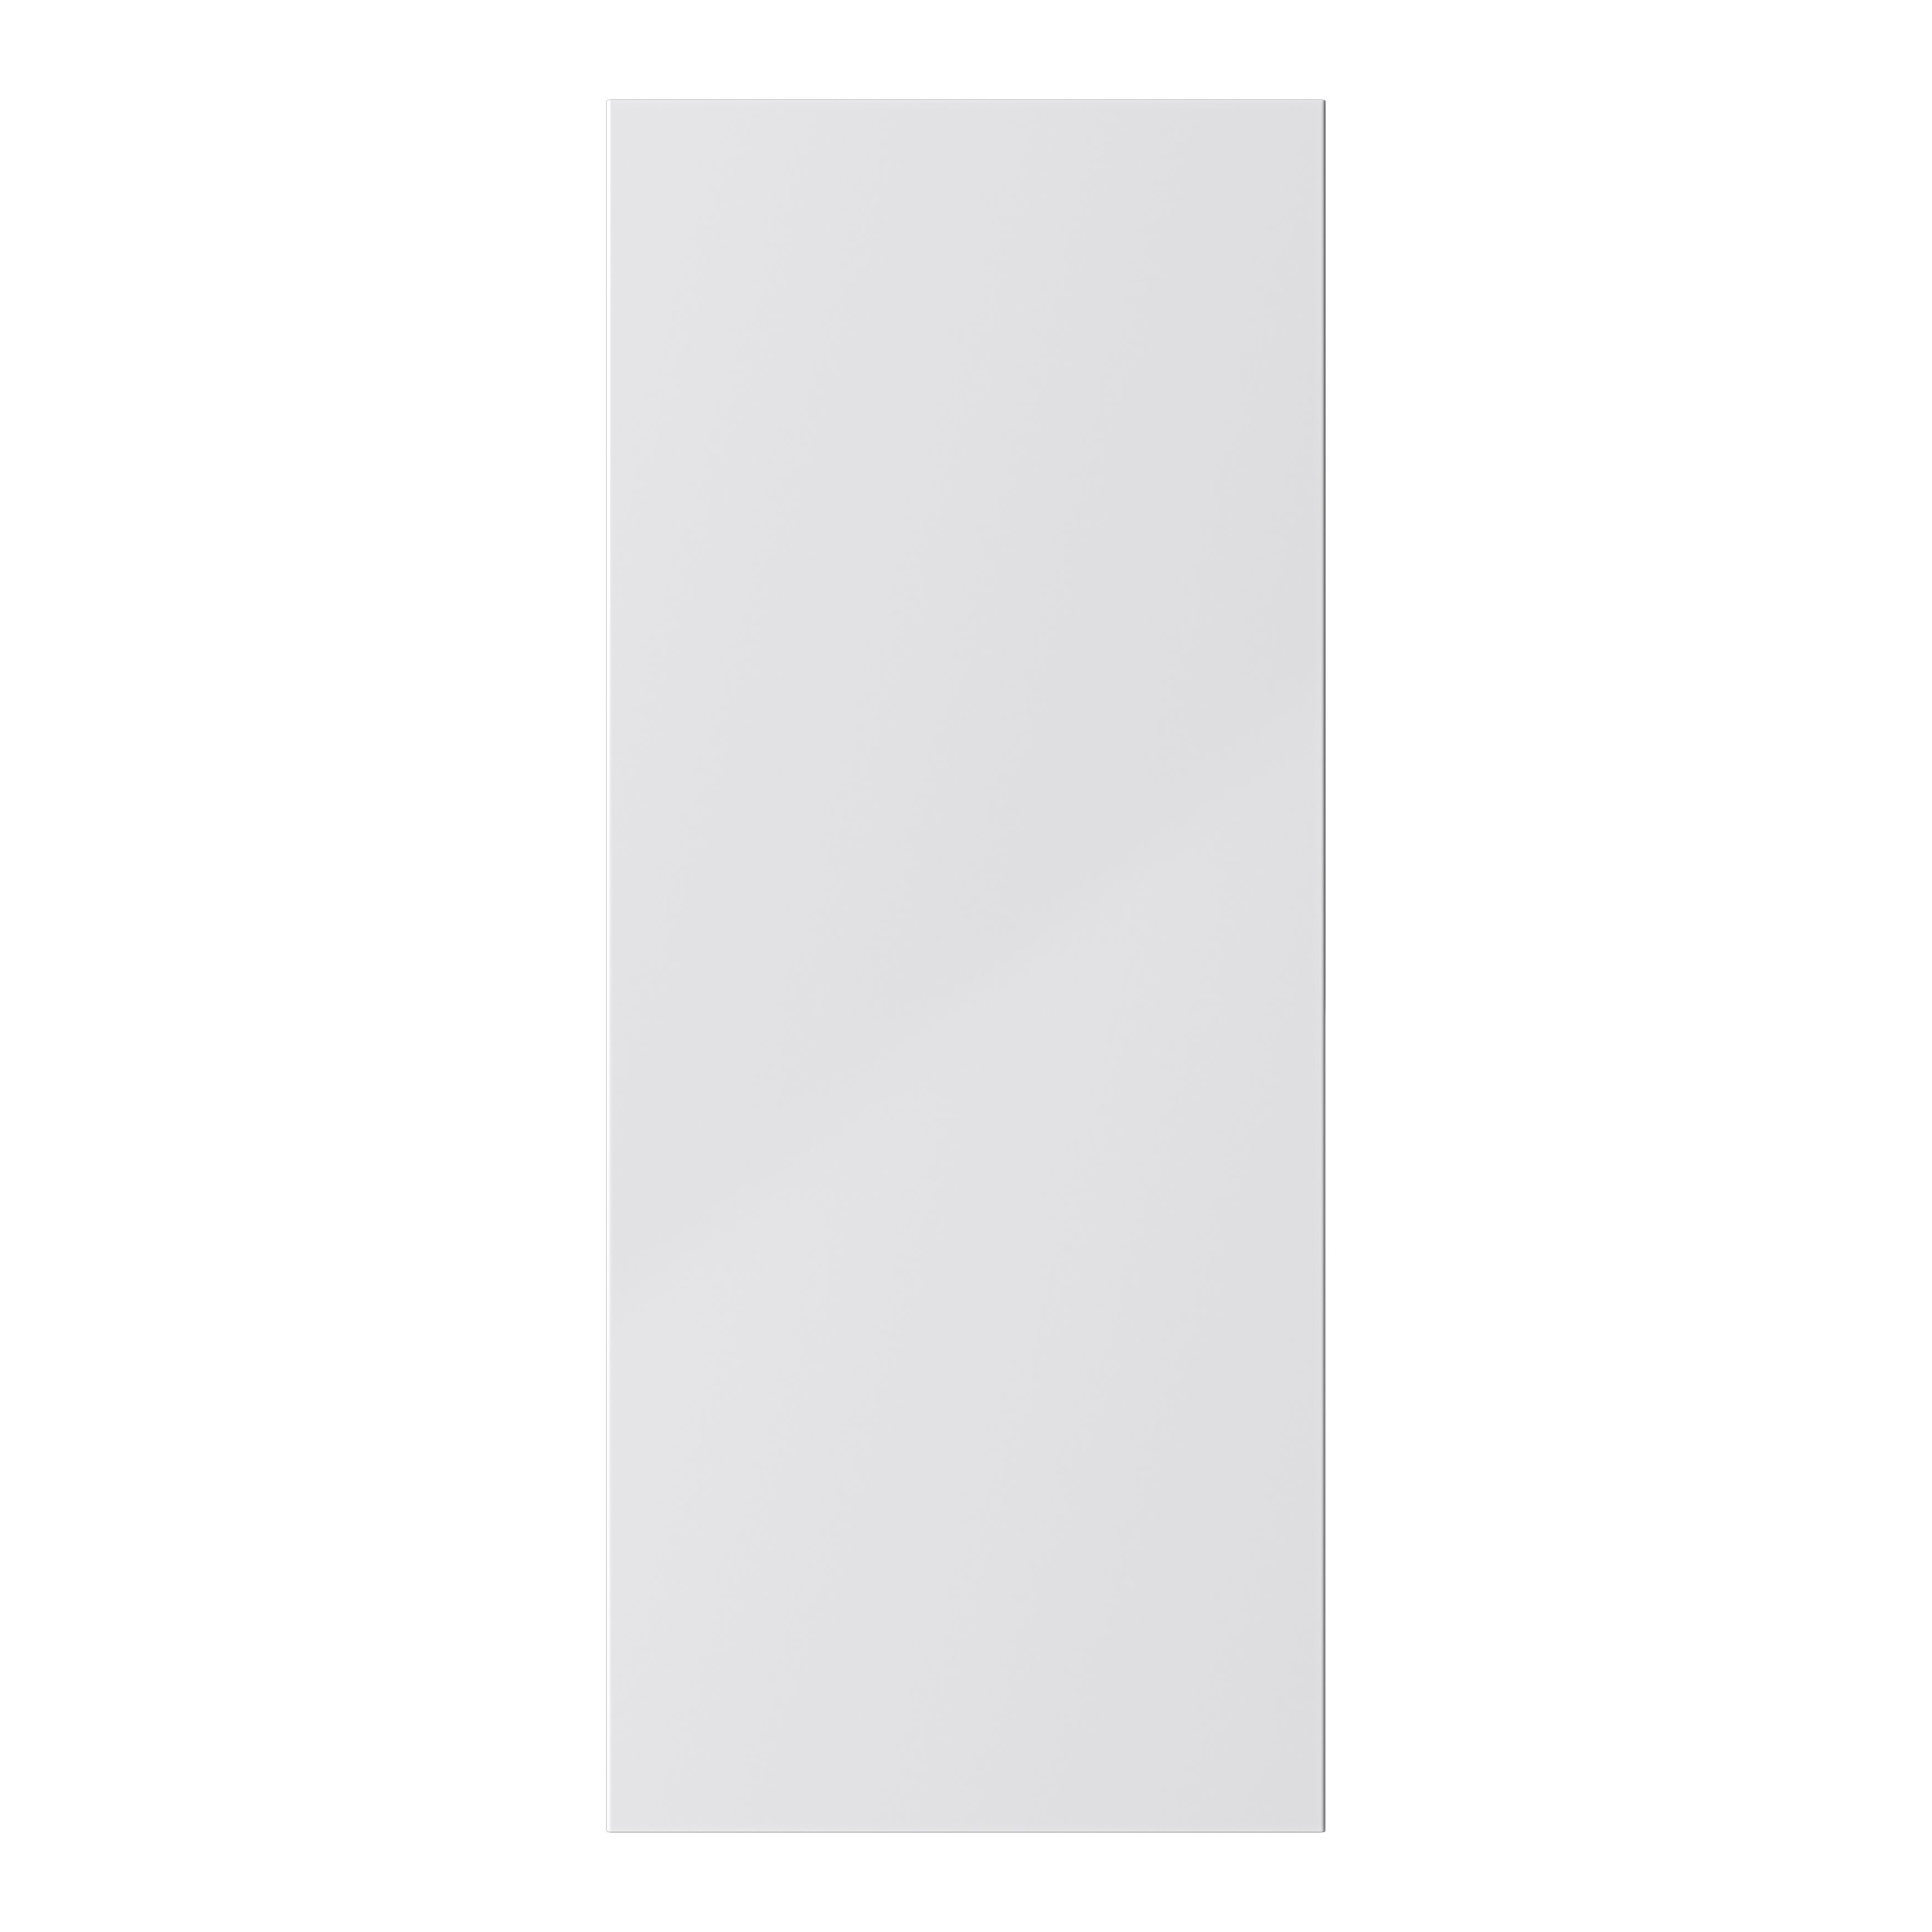 GoodHome Stevia Gloss grey Drawerline door & drawer front, (W)300mm (H)715mm (T)18mm